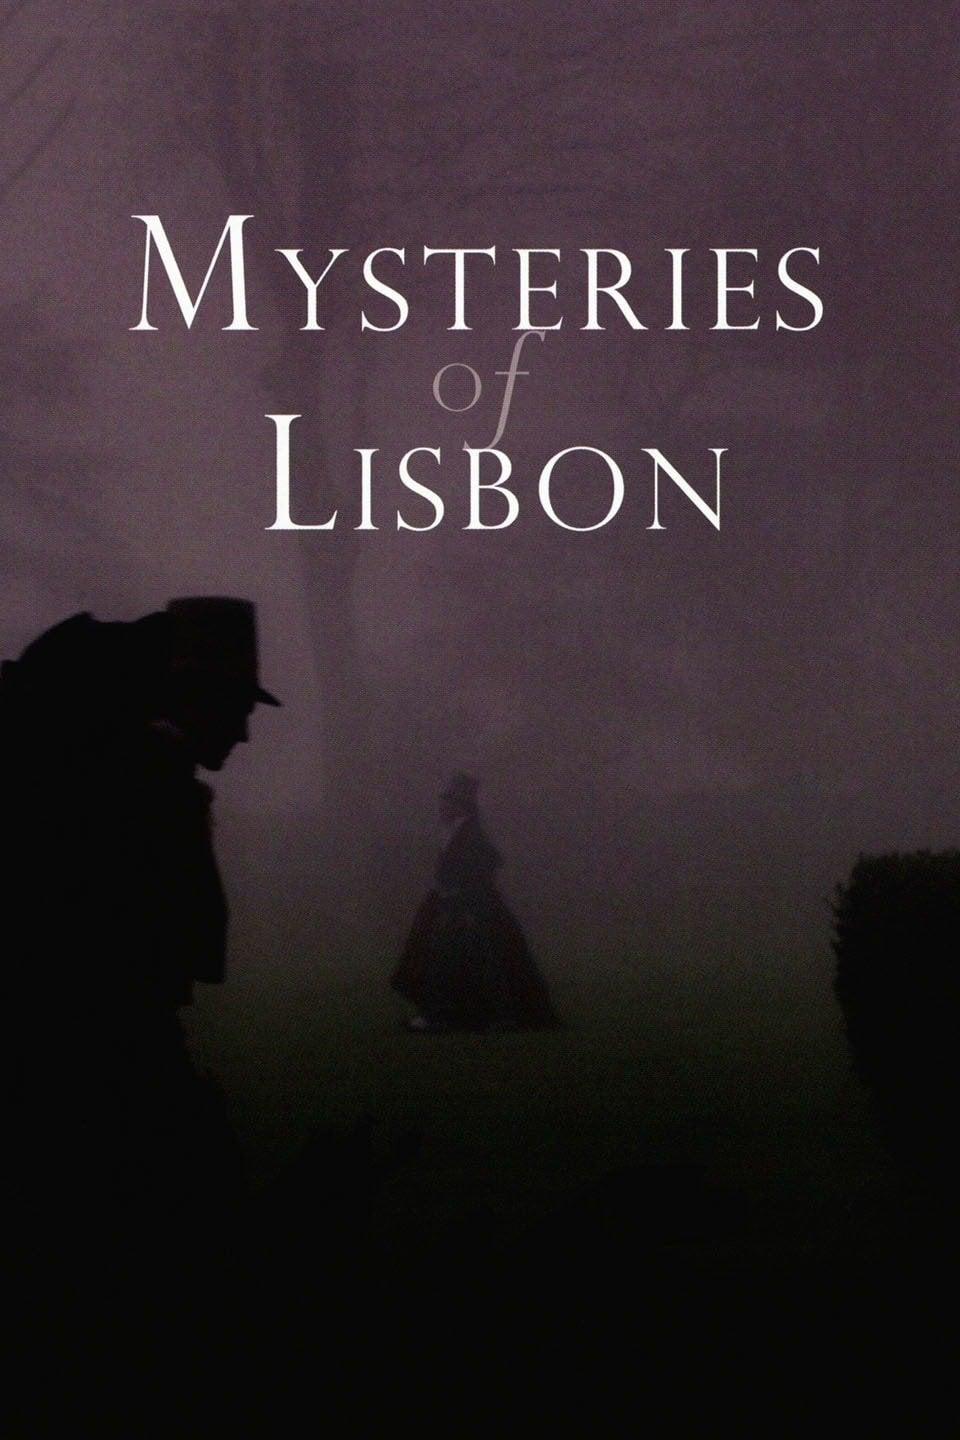 Mysteries of Lisbon poster